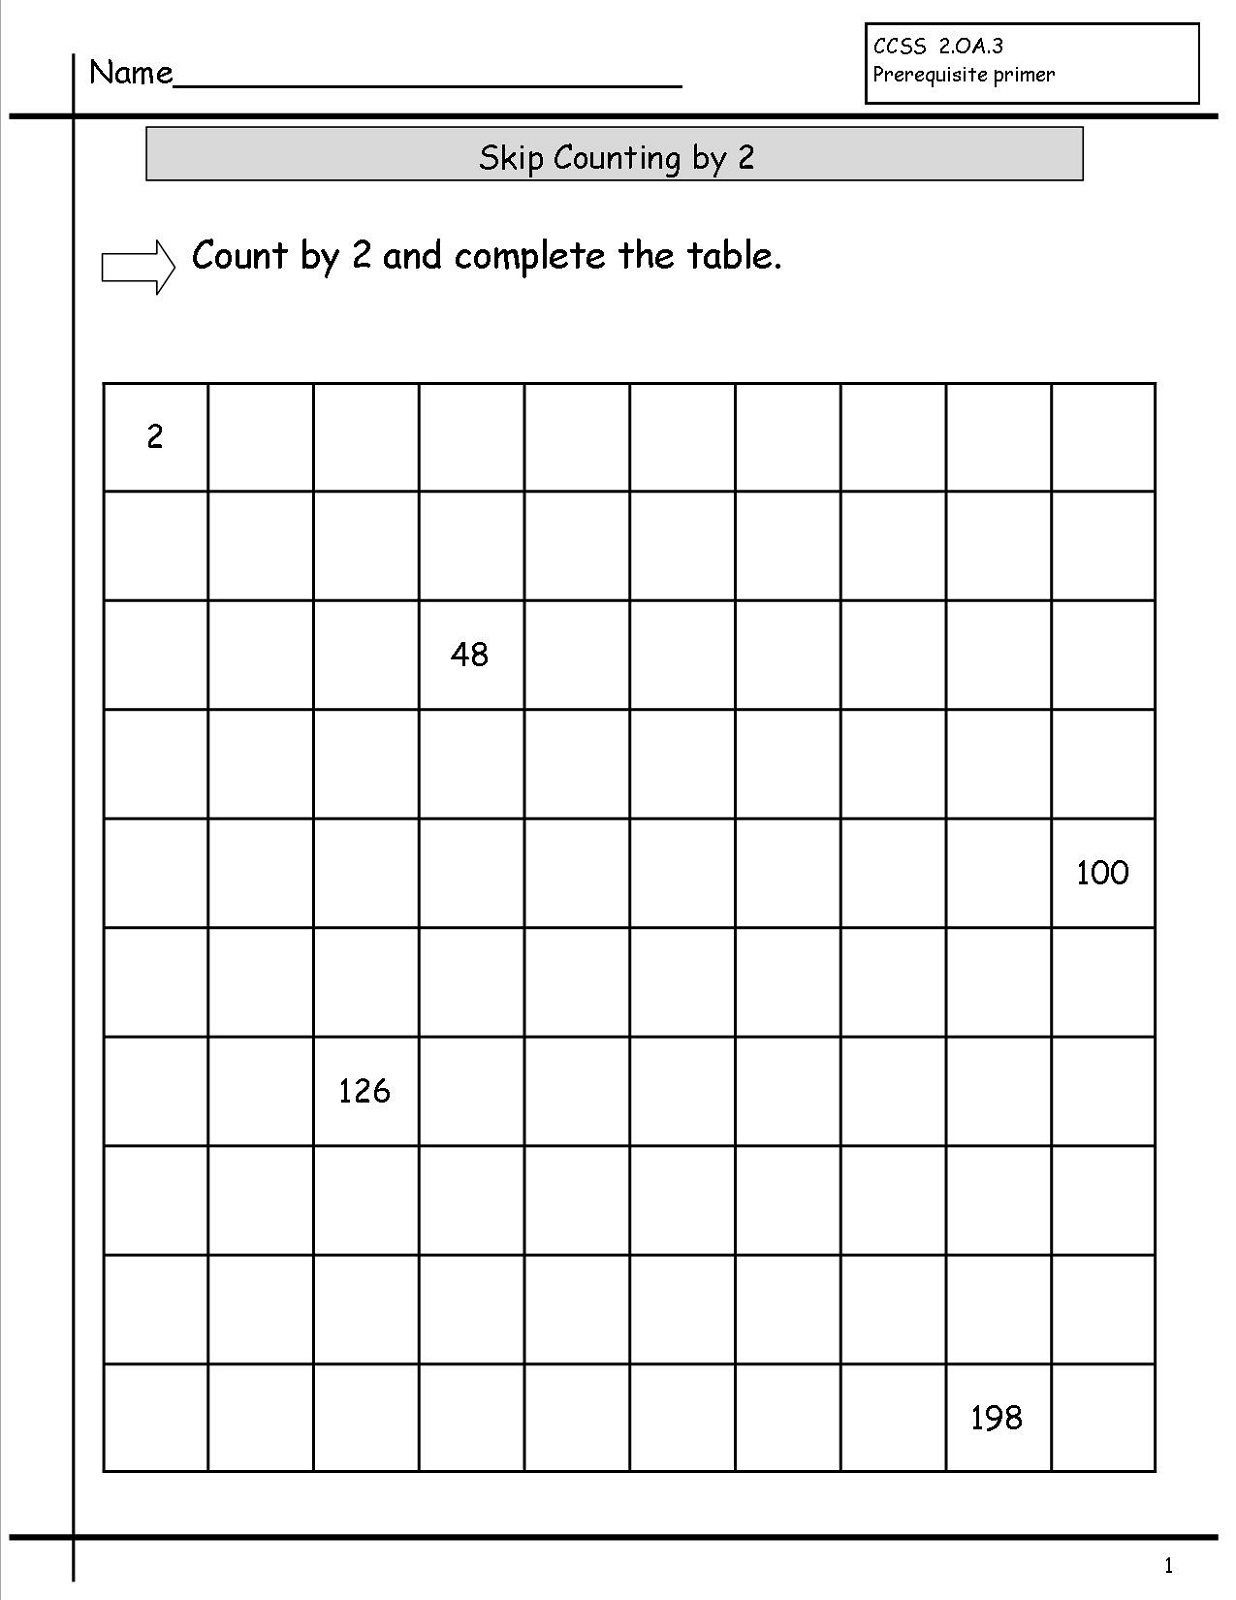 skip-count-by-2-worksheet-for-kids